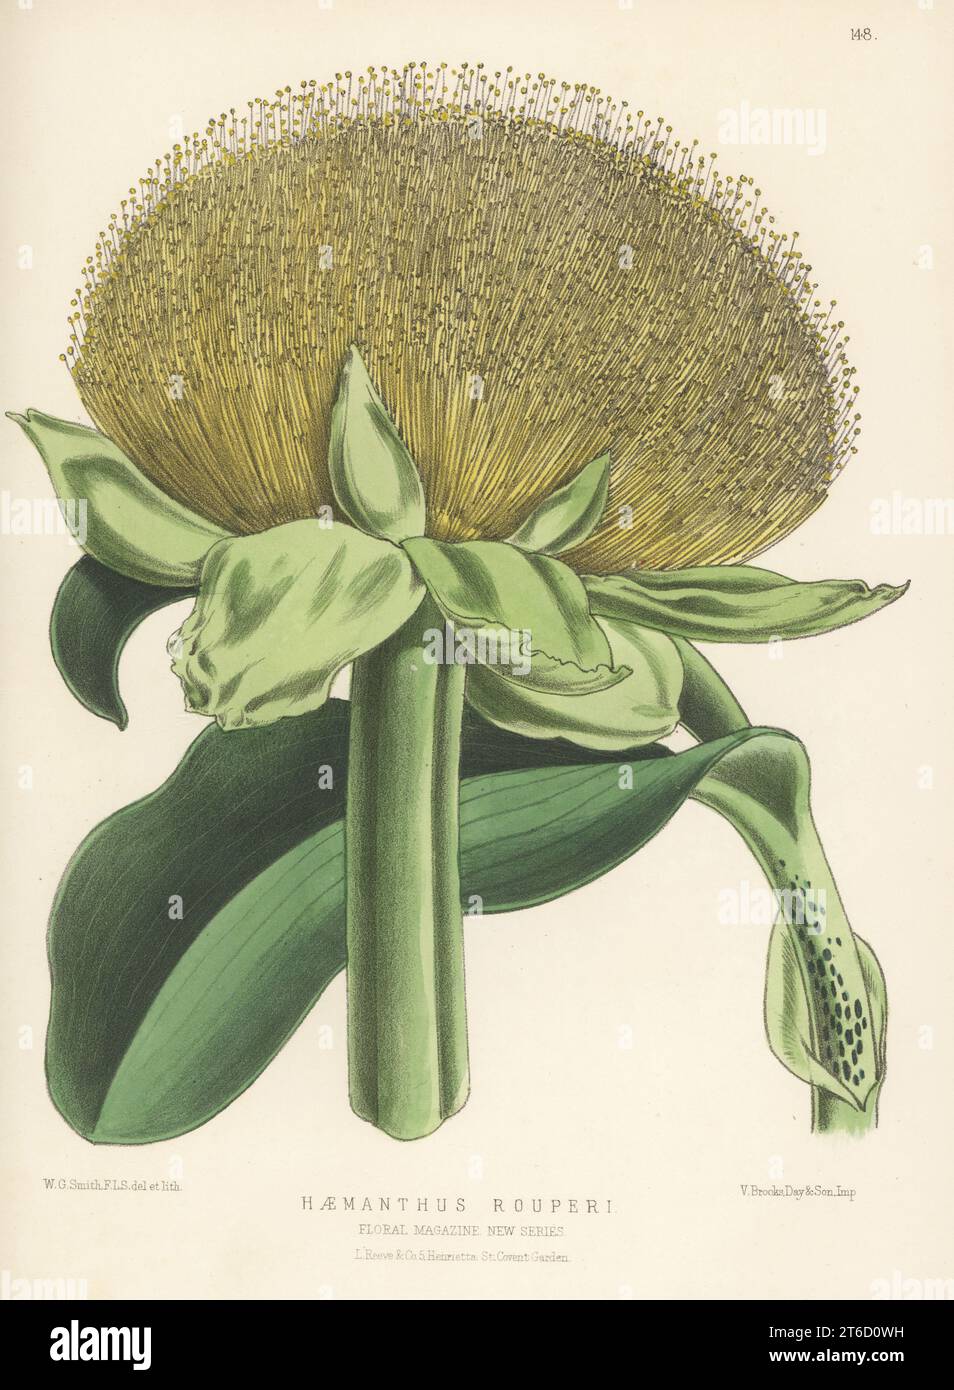 Paintbrush lily, Scadoxus puniceus, native to south and east Africa. As Haemanthus rouperi, named for Captain Rouper. Handcolored botanical illustration drawn and lithographed by Worthington George Smith from Henry Honywood Dombrain's Floral Magazine, New Series, Volume 4, L. Reeve, London, 1875. Lithograph printed by Vincent Brooks, Day & Son. Stock Photo